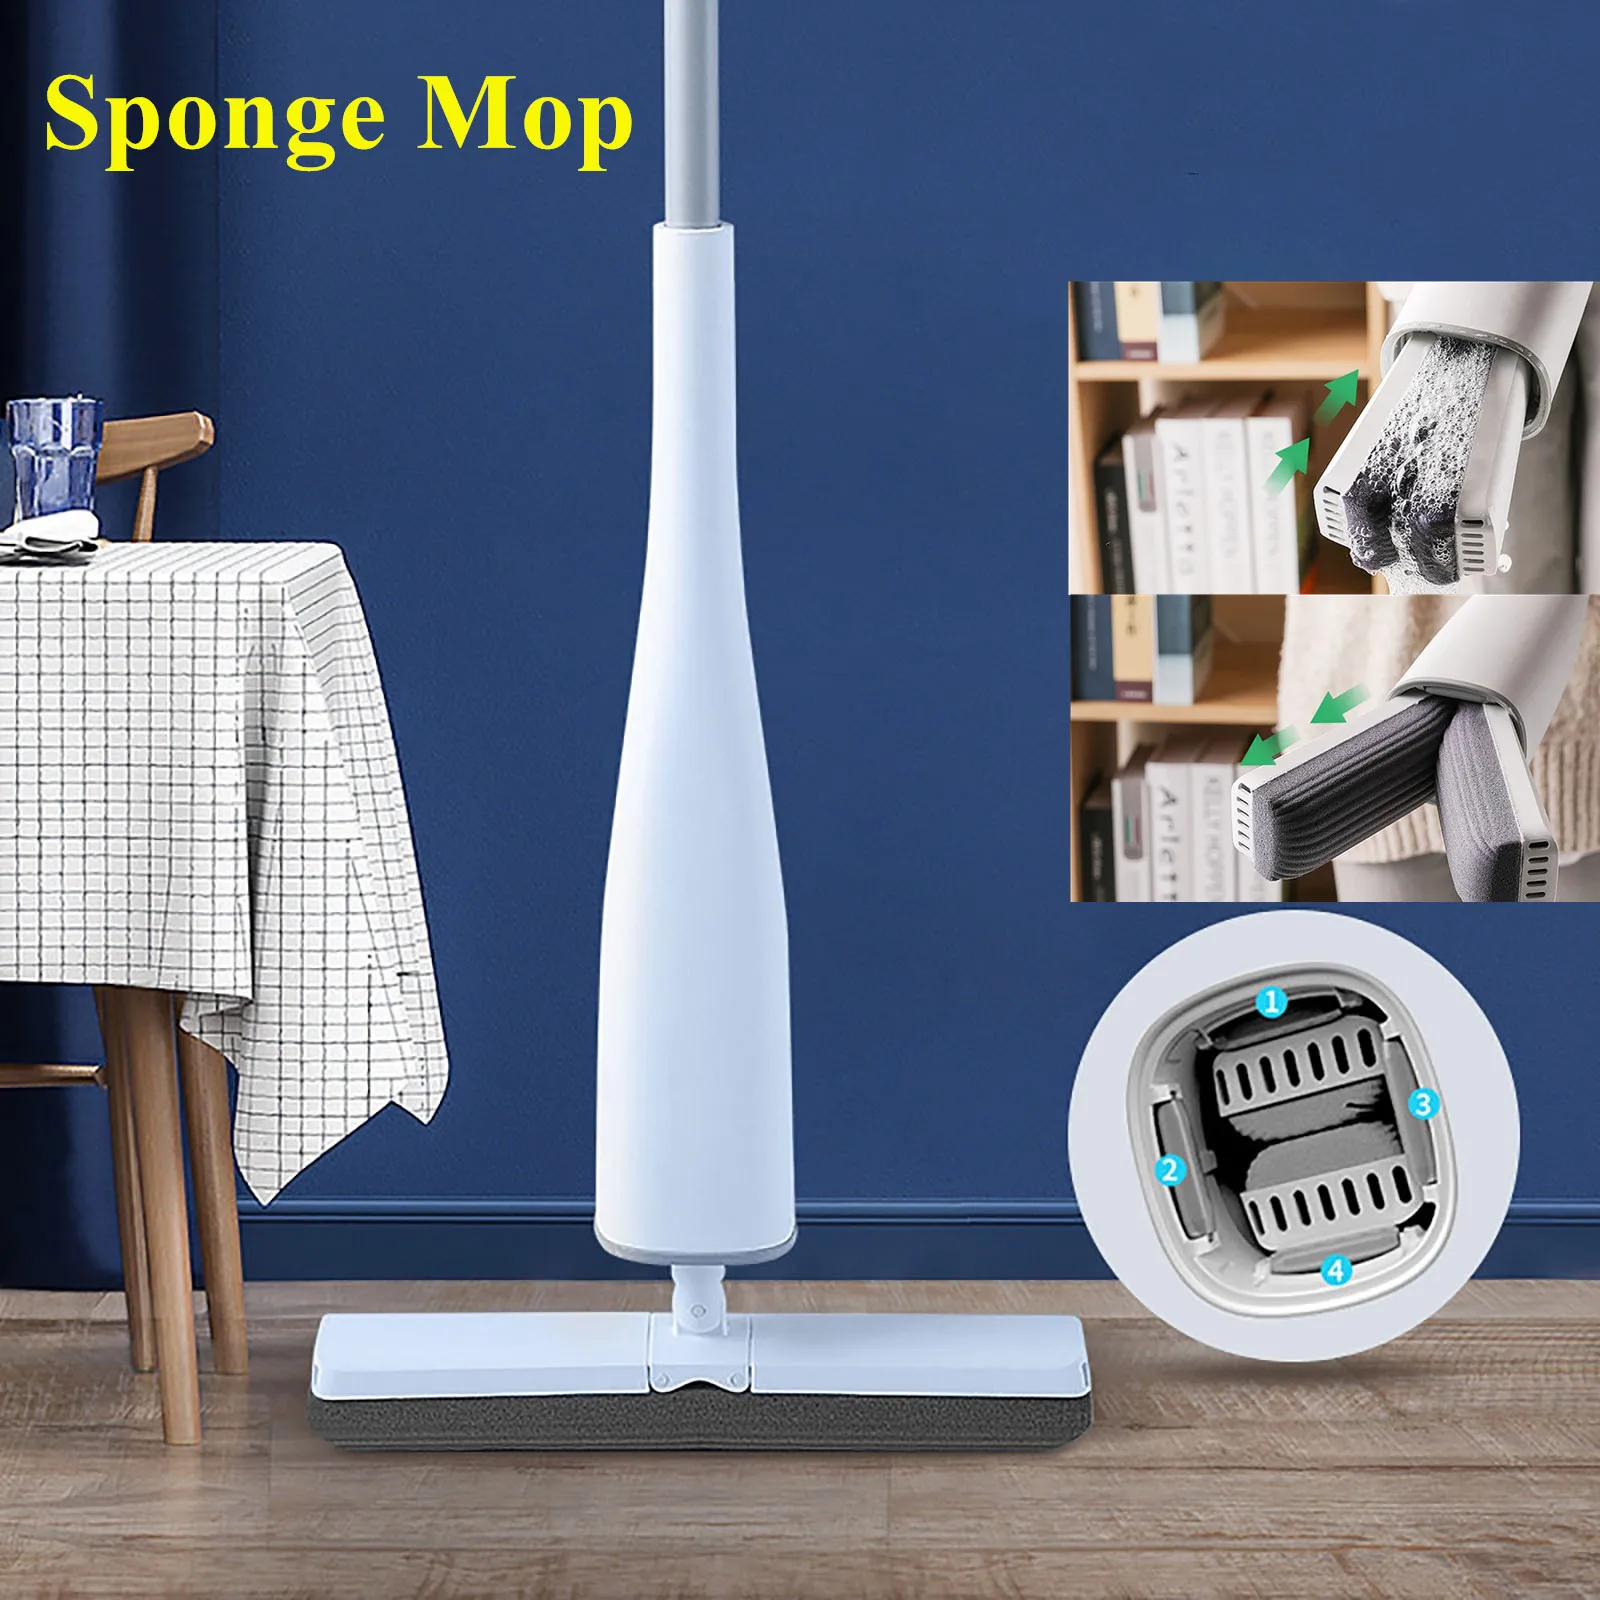 Splicing Sponge Mop Household Water-absorbing Glue Cotton Head Floor Washing Mop with Cleaning Liquid Mop Strong Decontamination